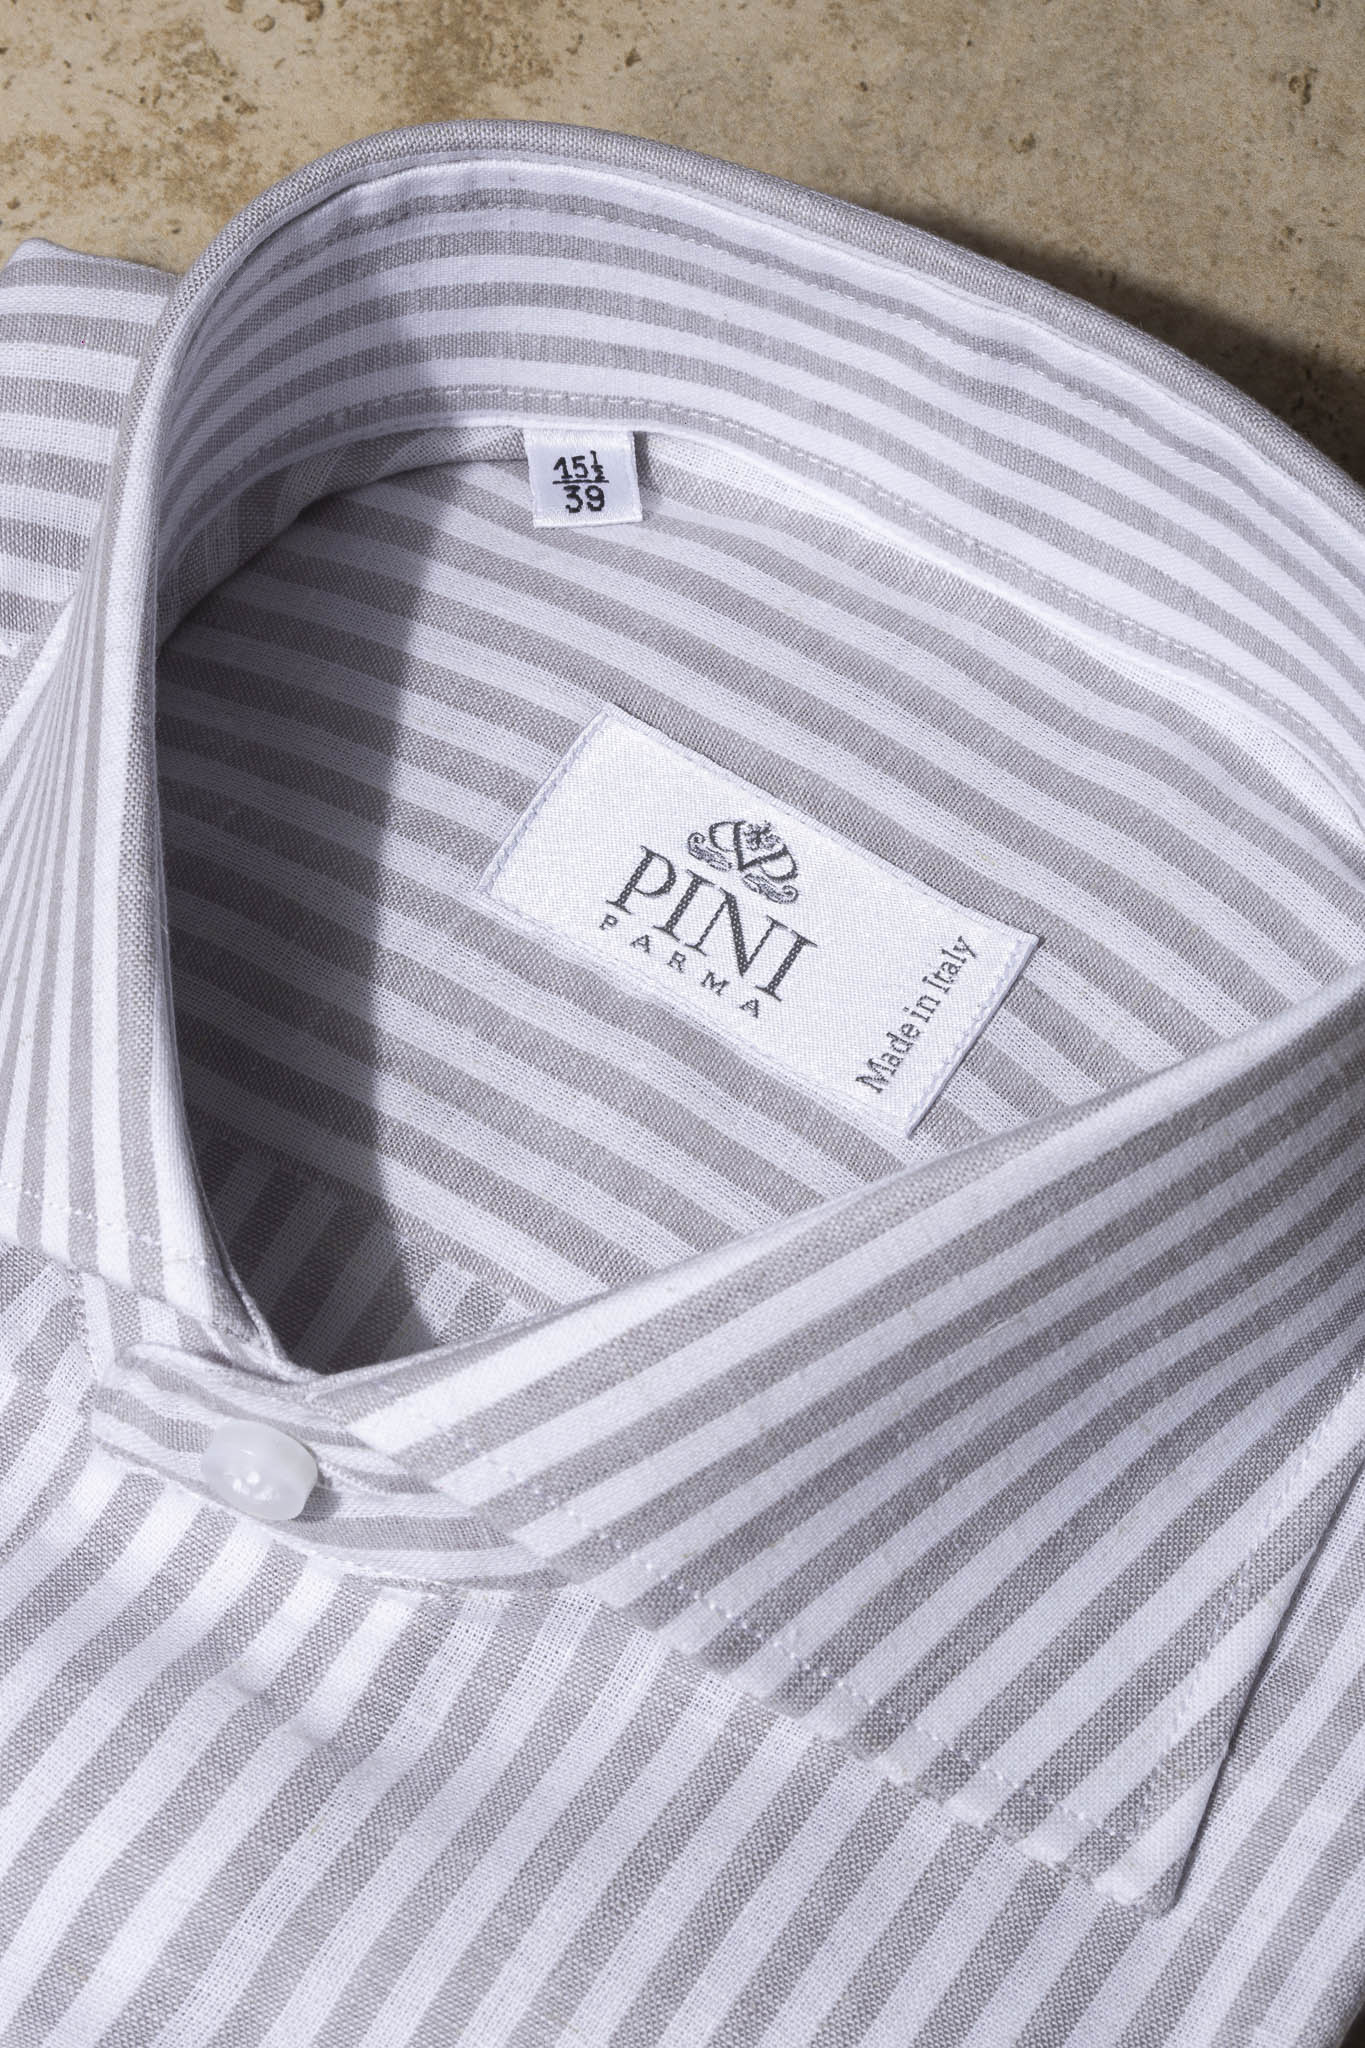 Light grey striped shirt - Made in Italy